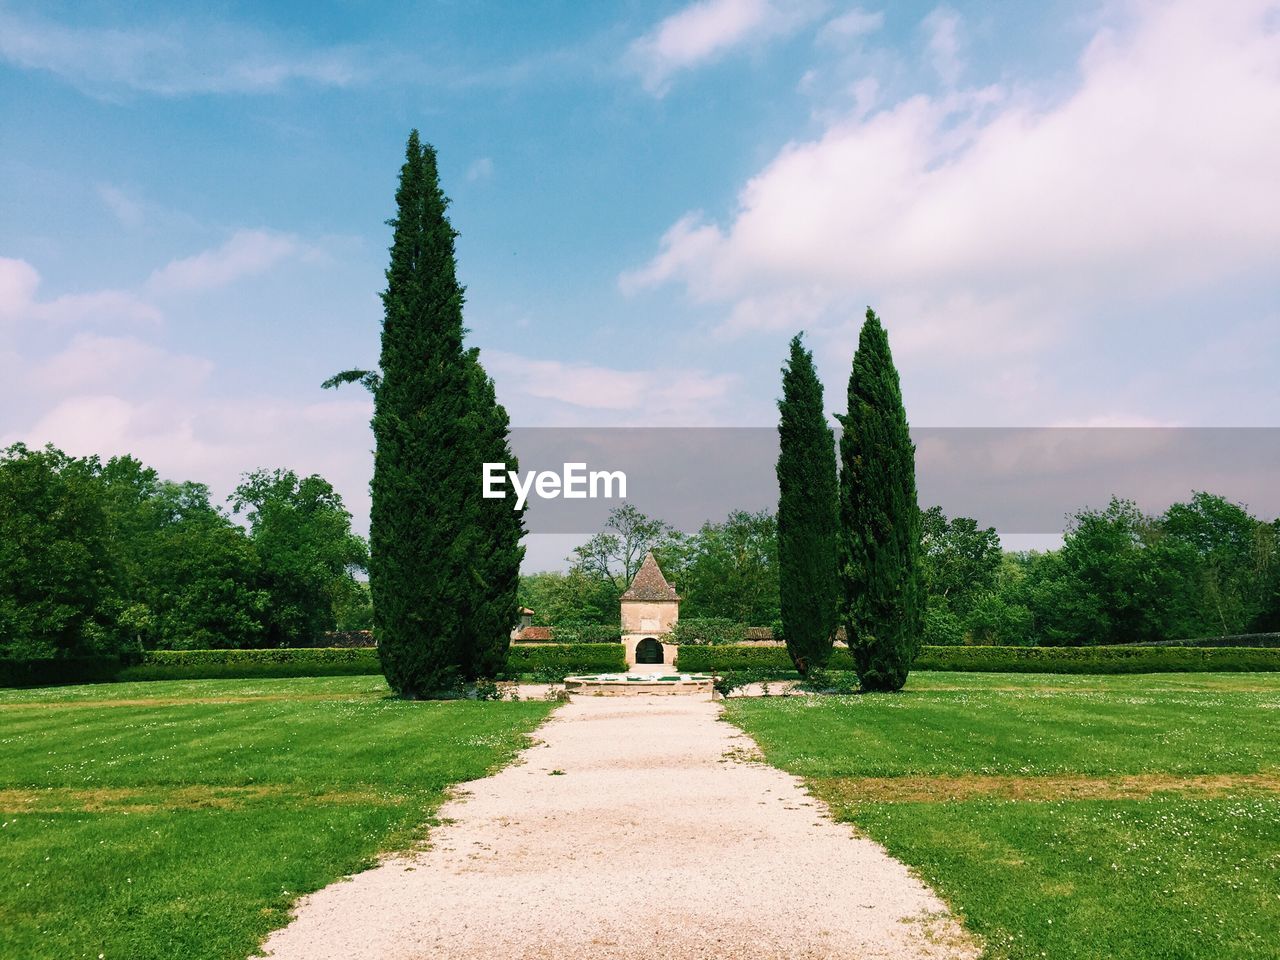 Elegance of a garden with cypress trees inspired by the italian style